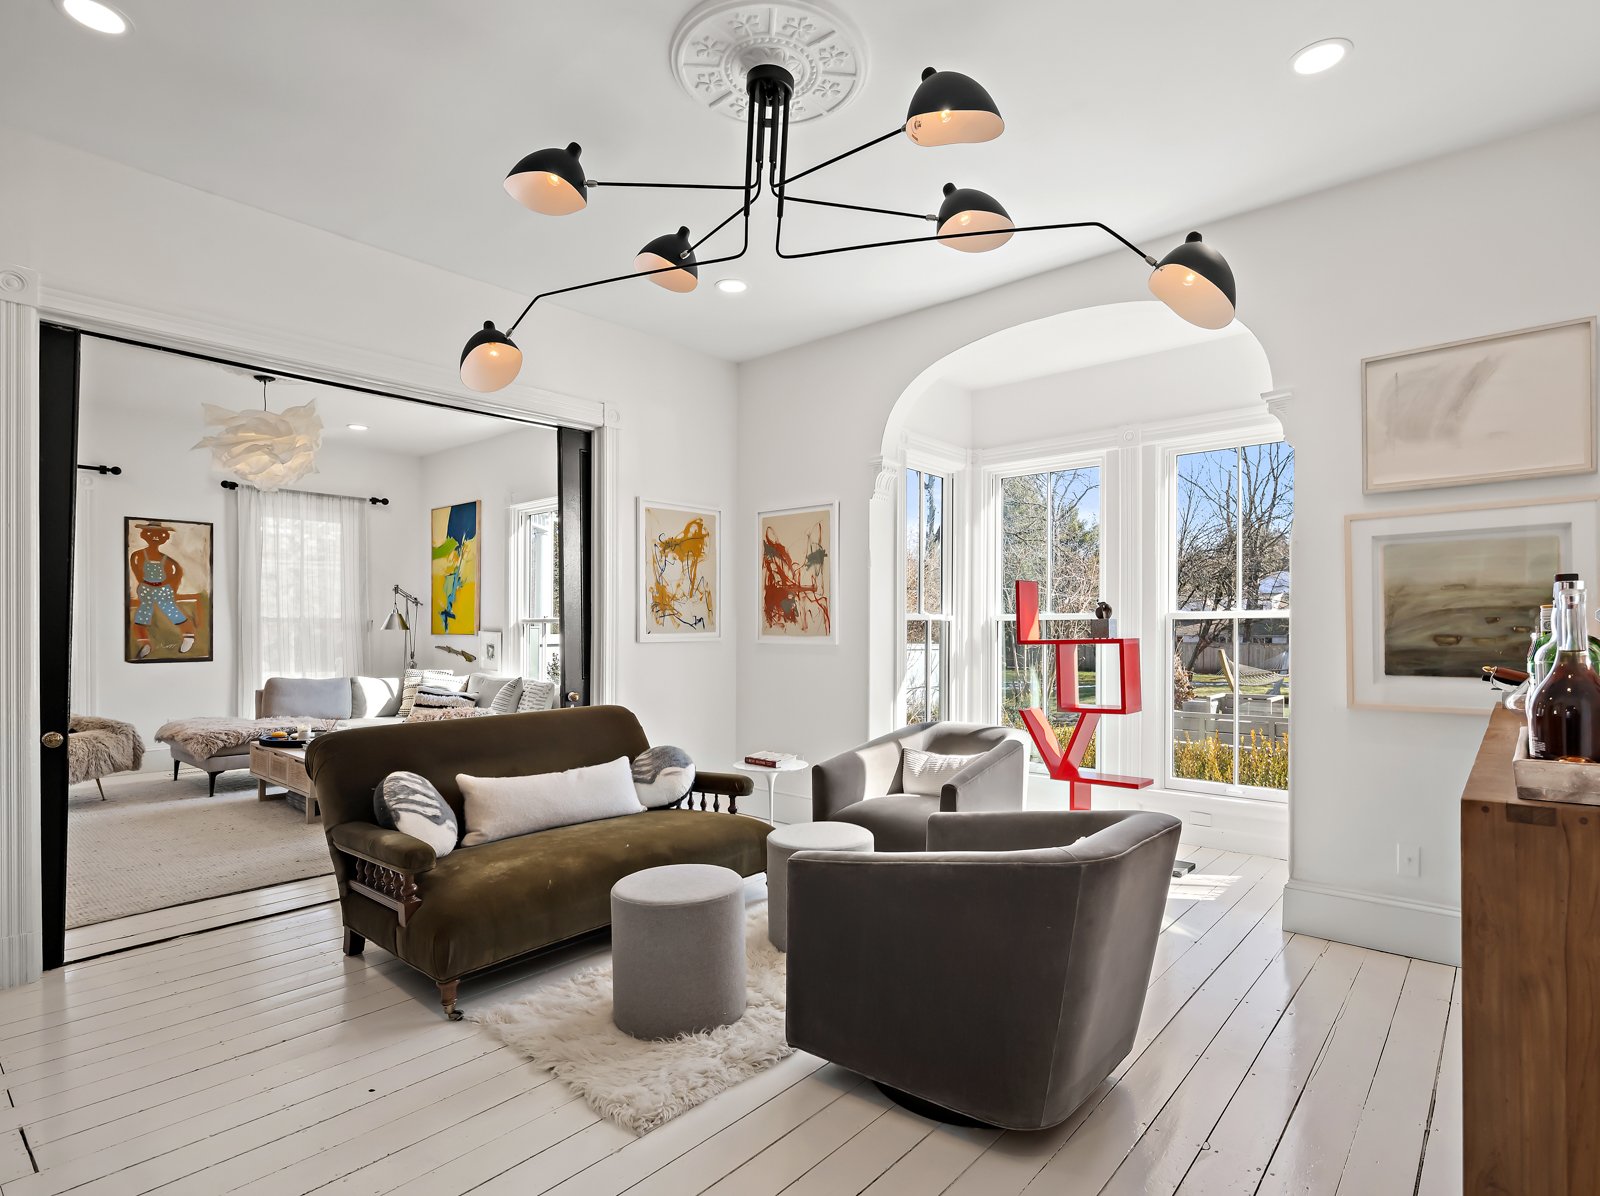 Living room to family room at 113 North Avenue Westport CT-10.jpg